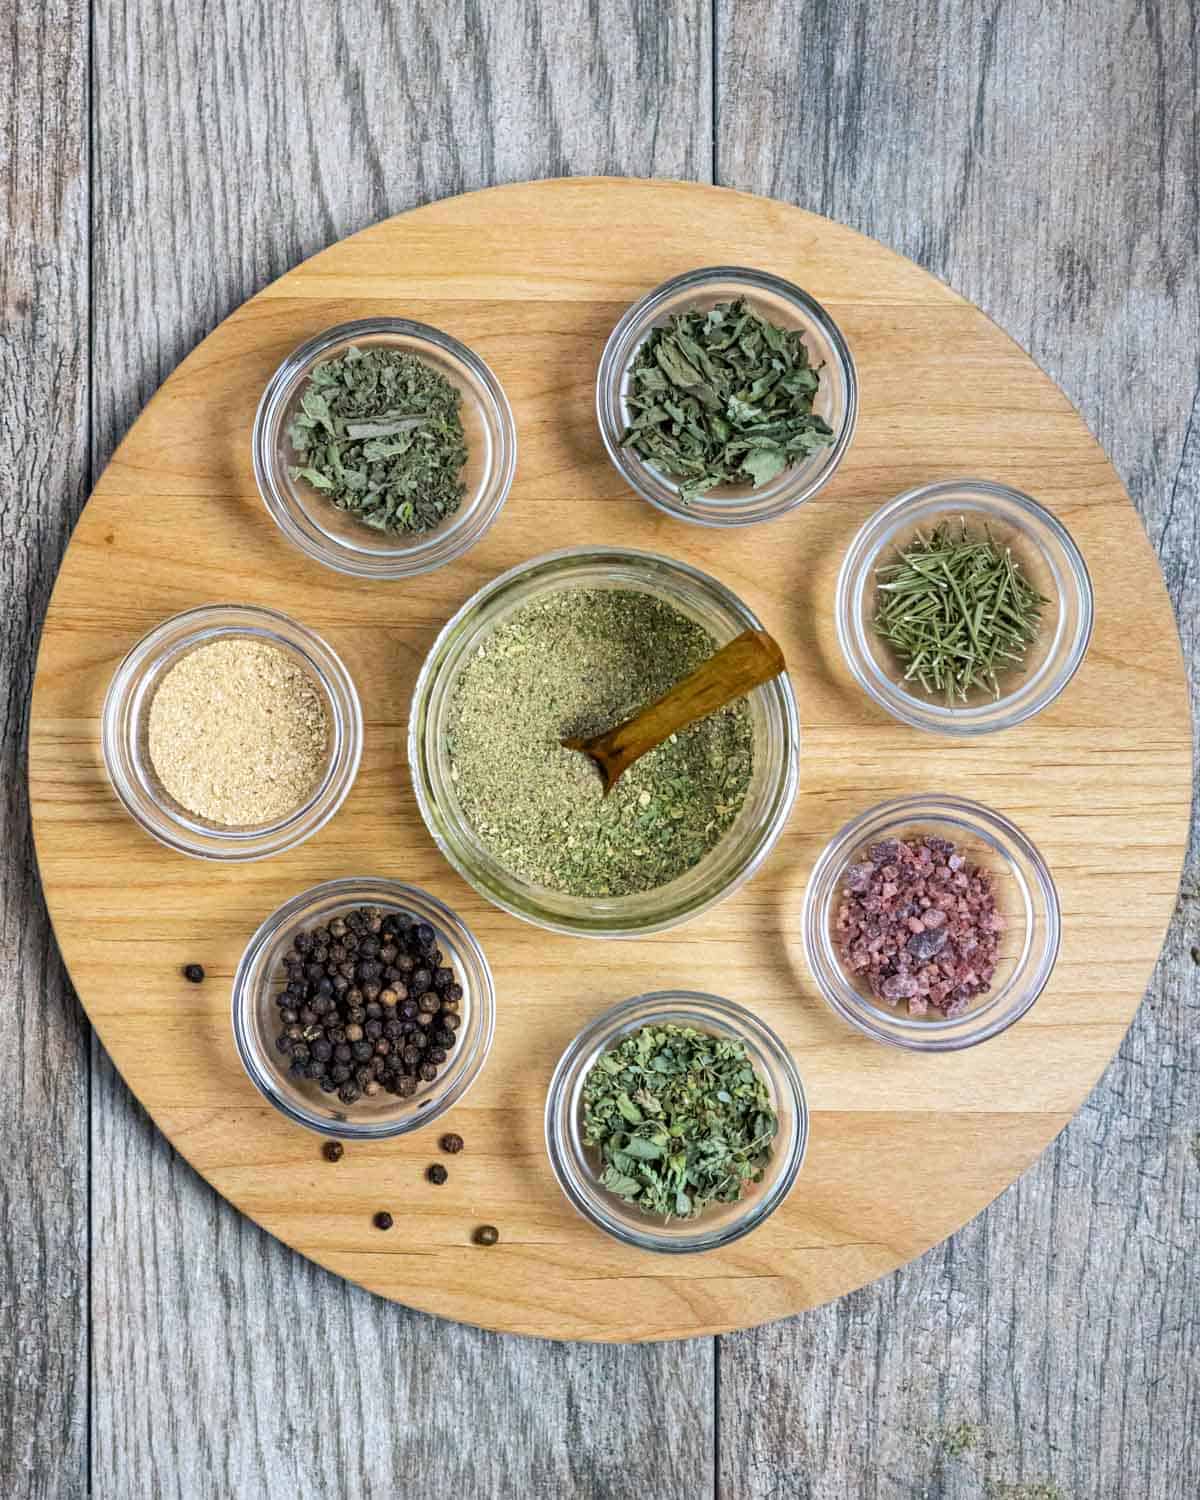 Small glass bowls with spices on a round board with a jar of spice blend in the center.